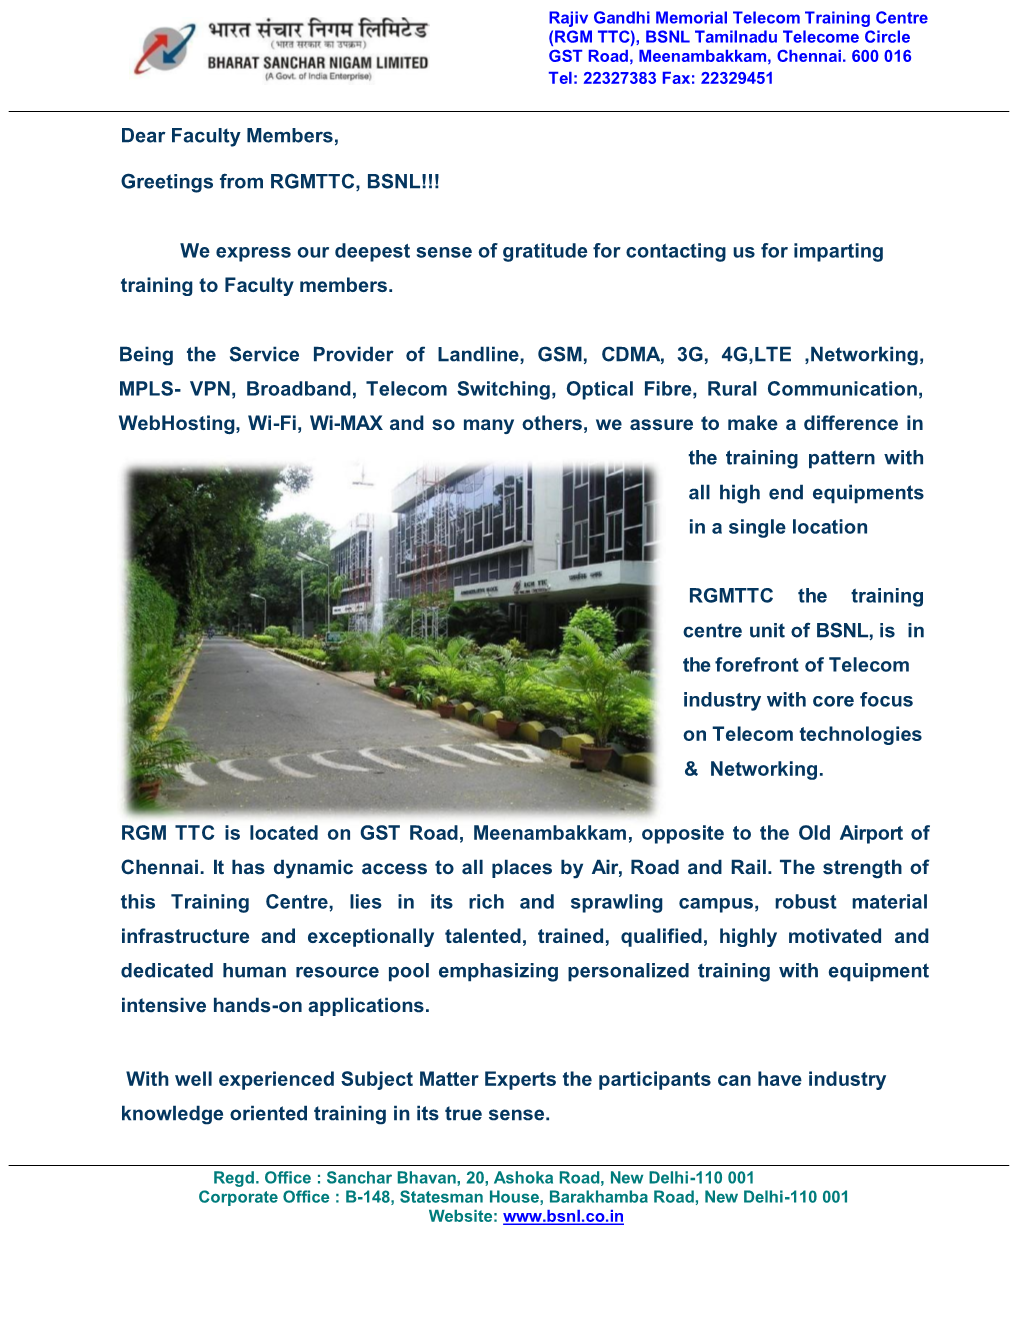 Dear Faculty Members, Greetings from RGMTTC, BSNL!!! We Express Our